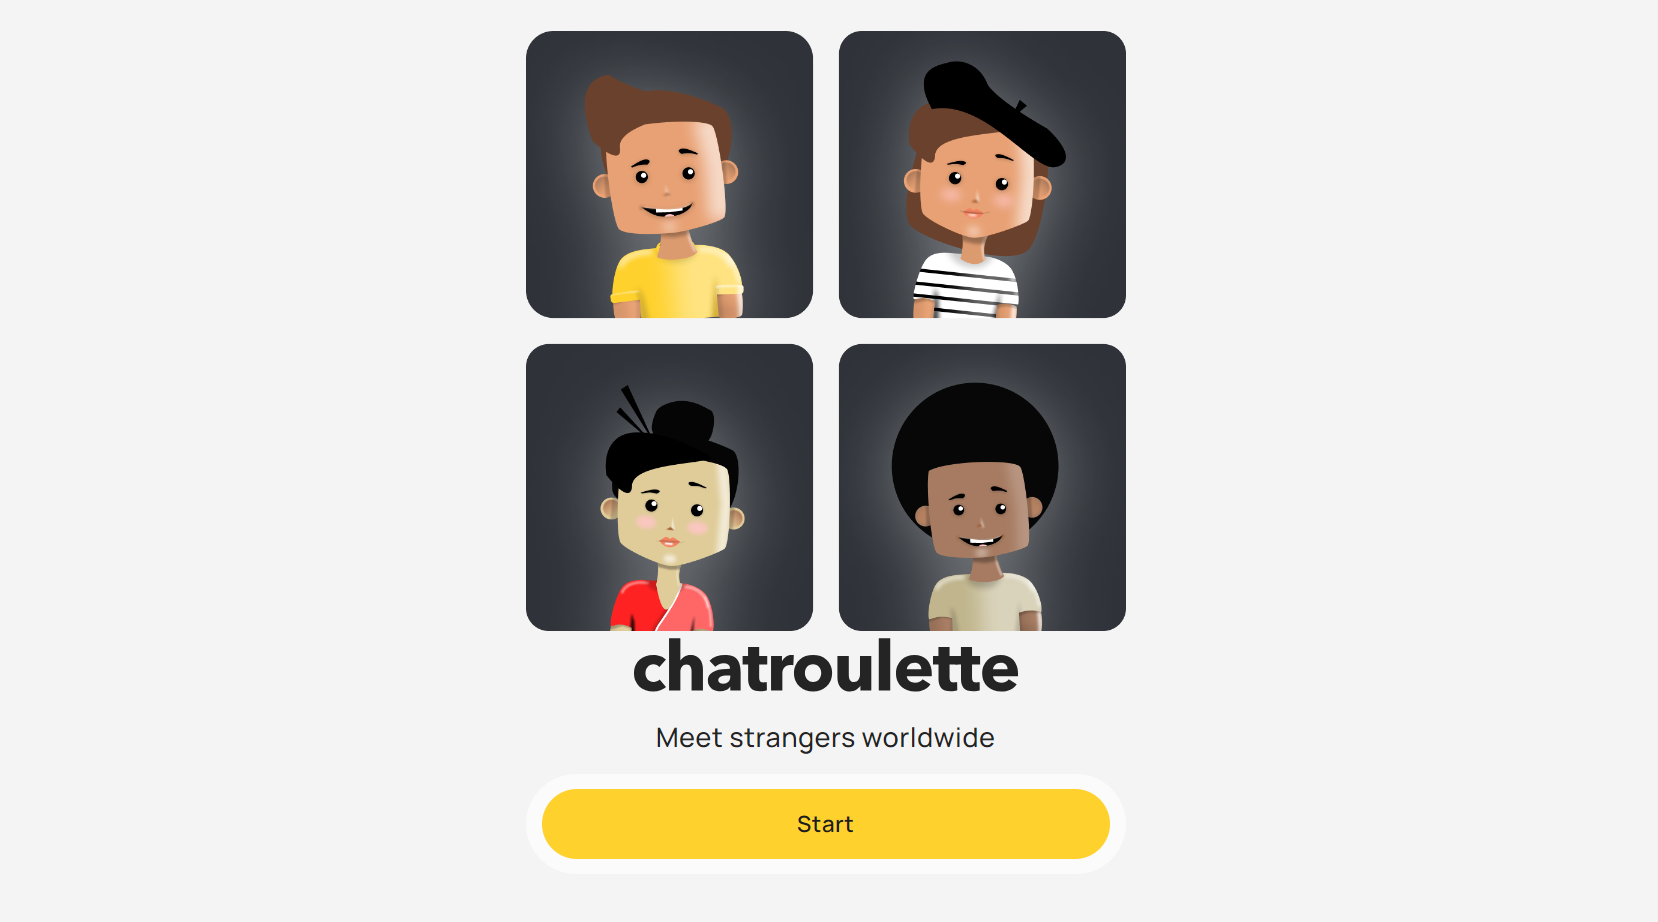 Chatroulette's homepage.